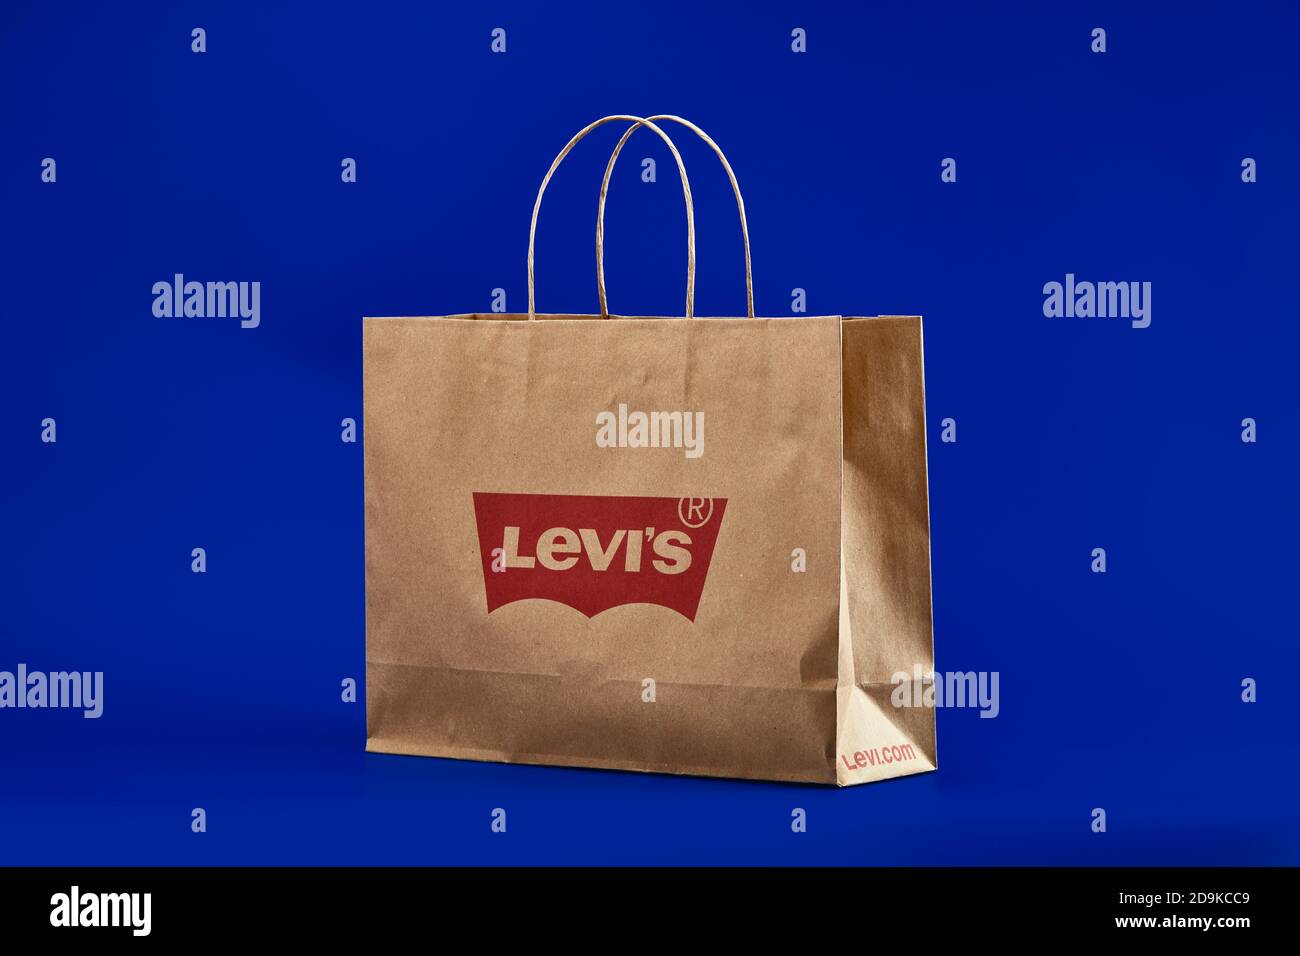 Levi's paper shopping bags. 26.03.2020 